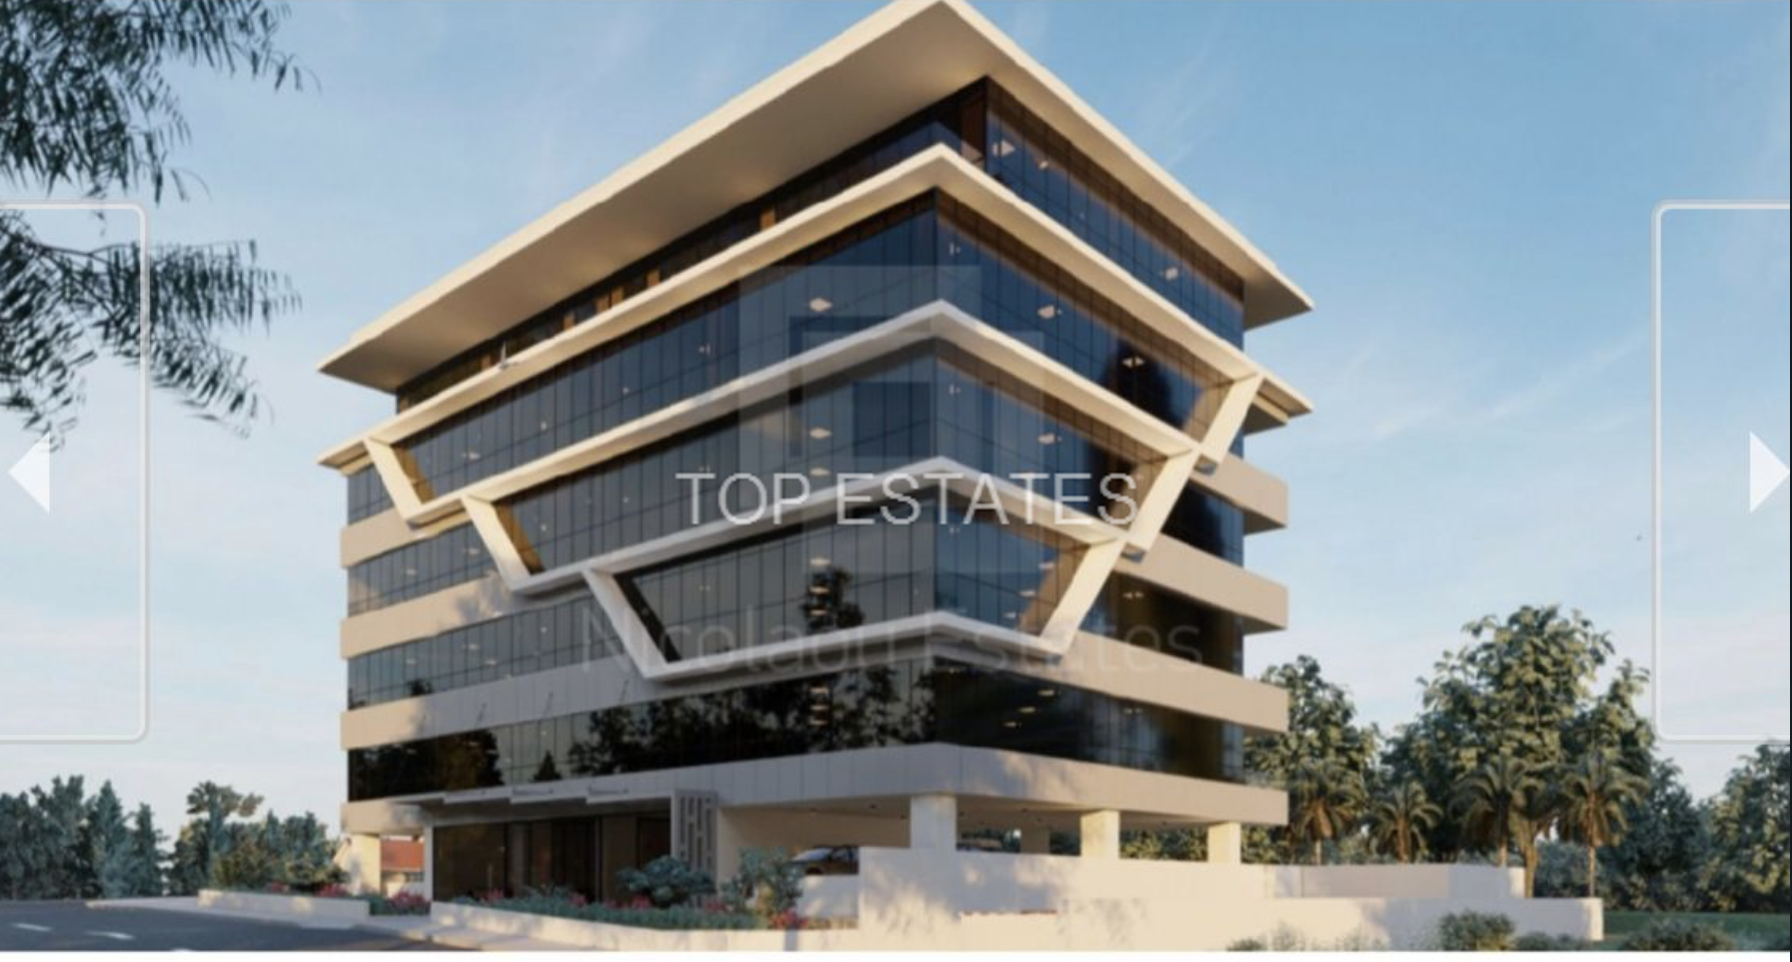 570m2 state of the art office spaces in Acropoli for rent